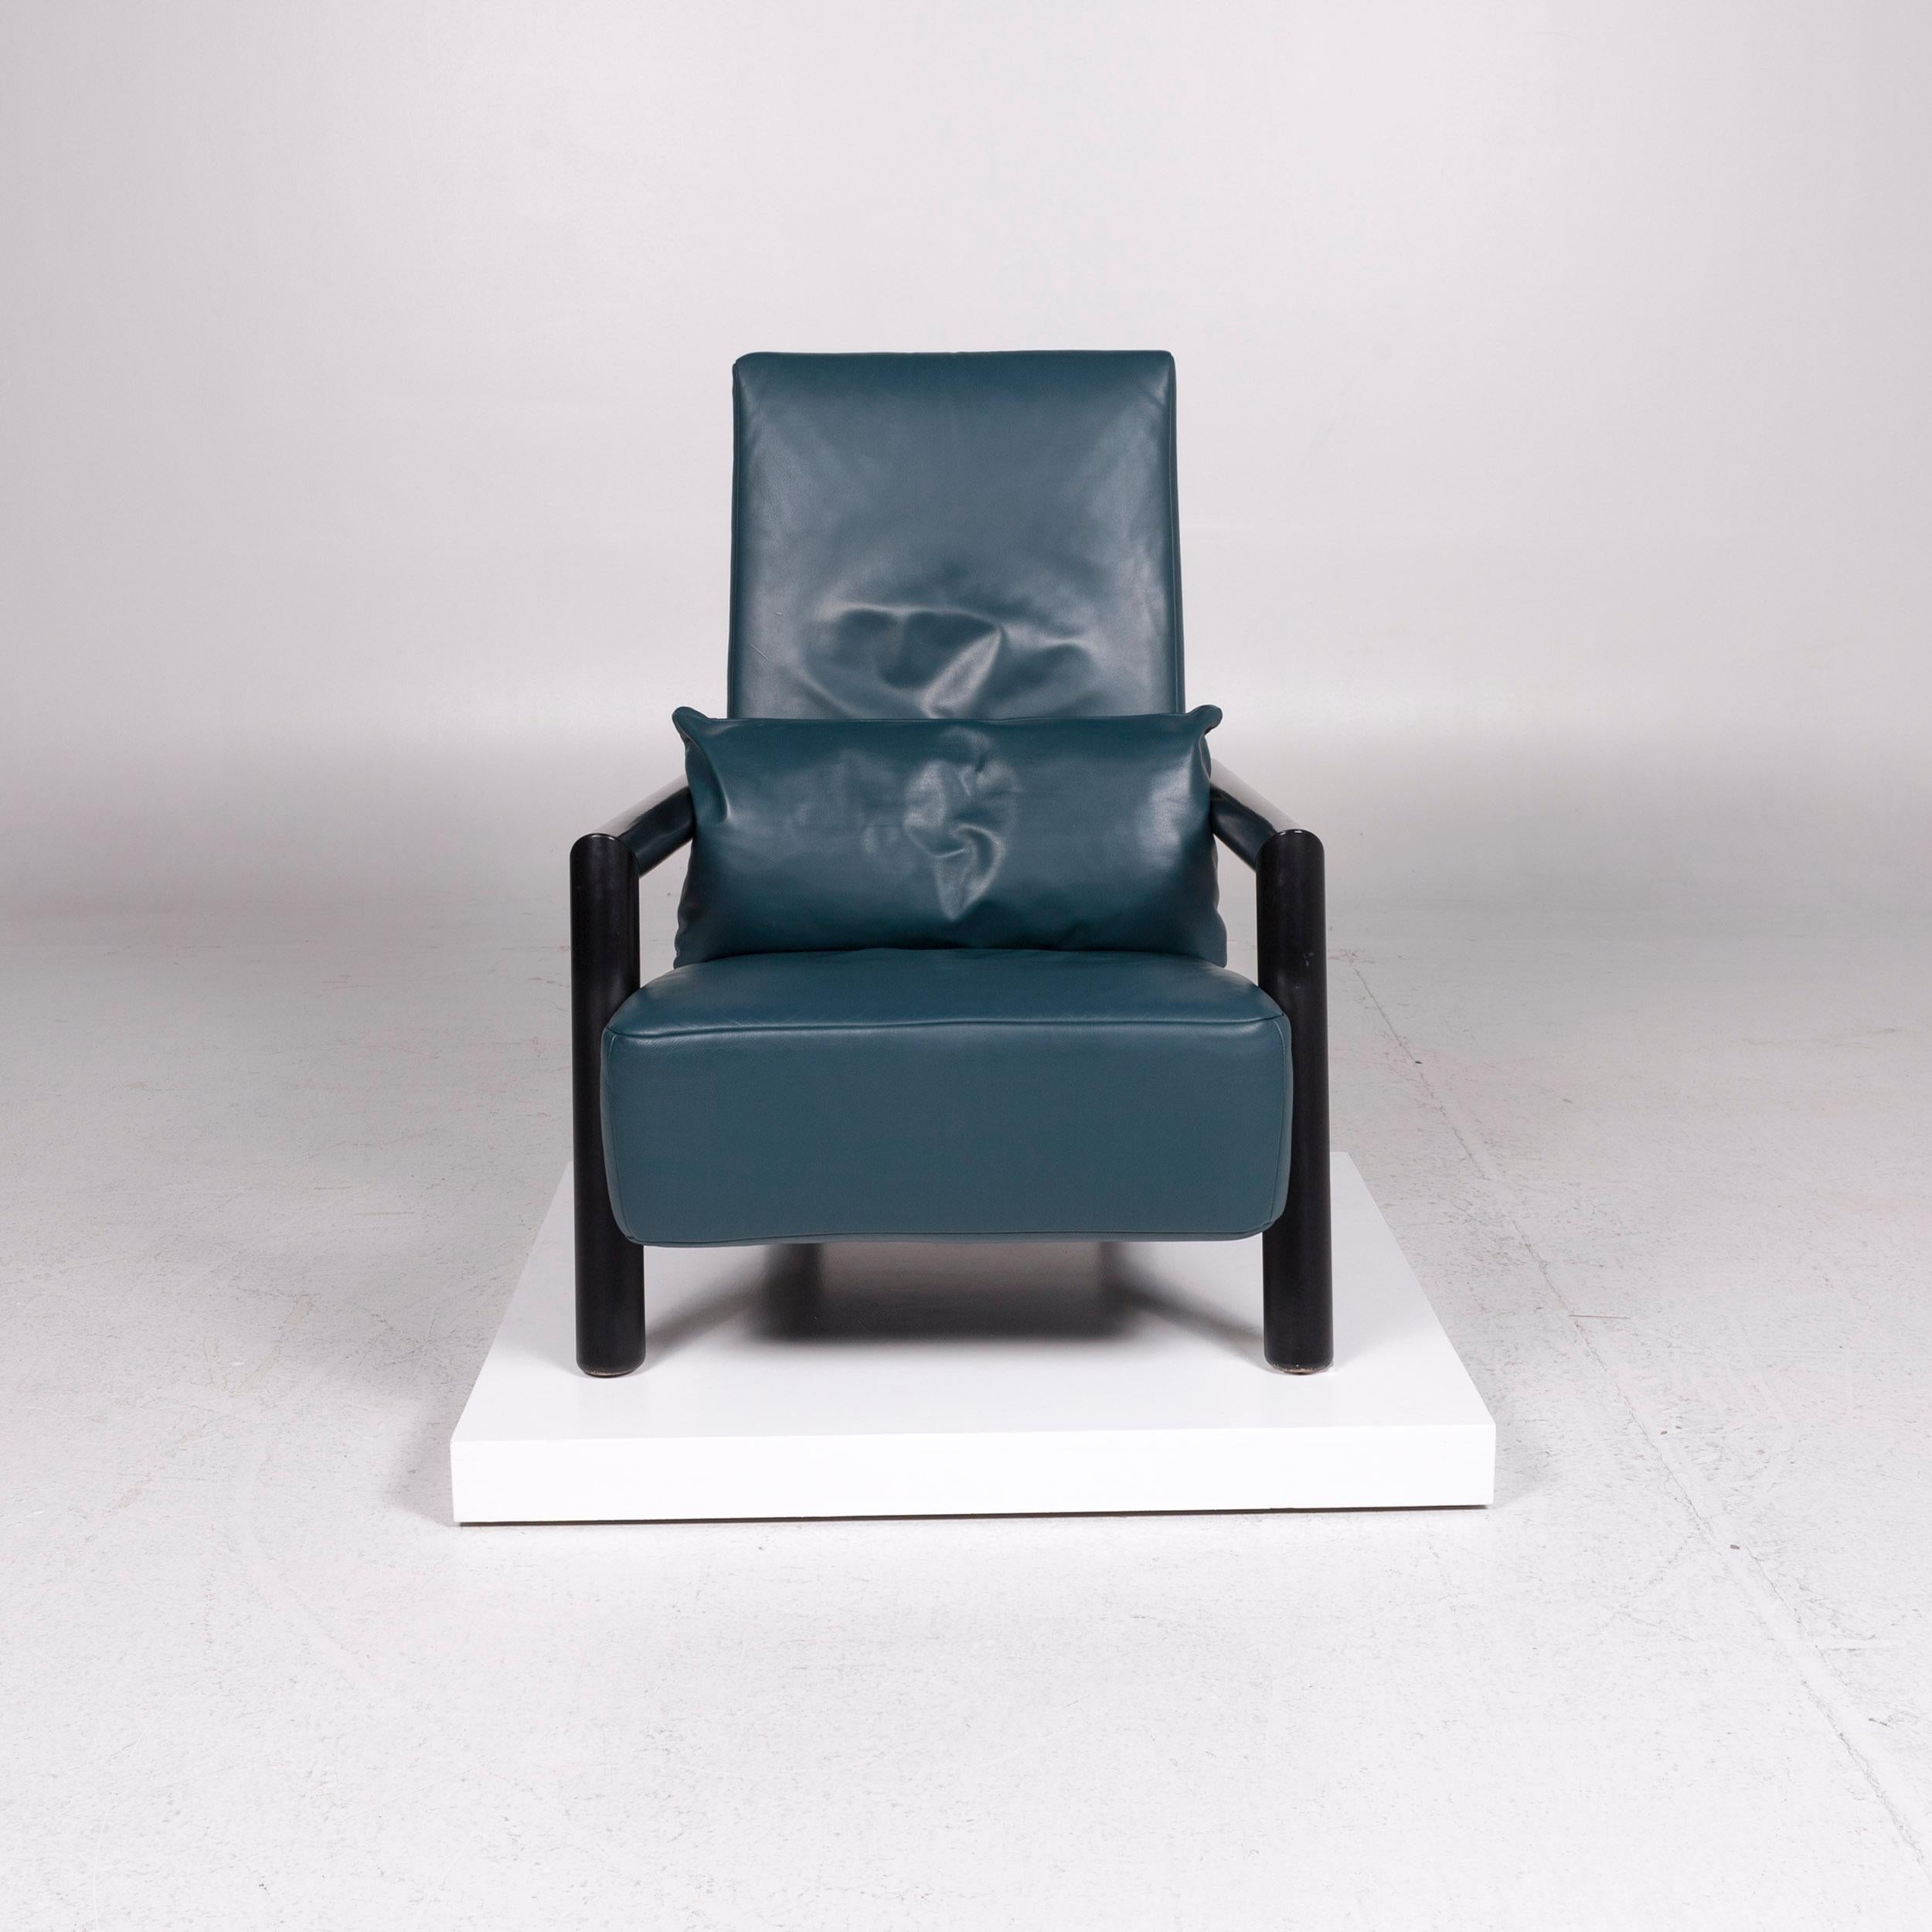 We bring to you a Rolf Benz leather armchair petrol blue.
 

 Product measurements in centimeters:
 

Depth 89
Width 77
Height 104
Seat-height 40
Rest-height 55
Seat-depth 48
Seat-width 63
Back-height 103.
 